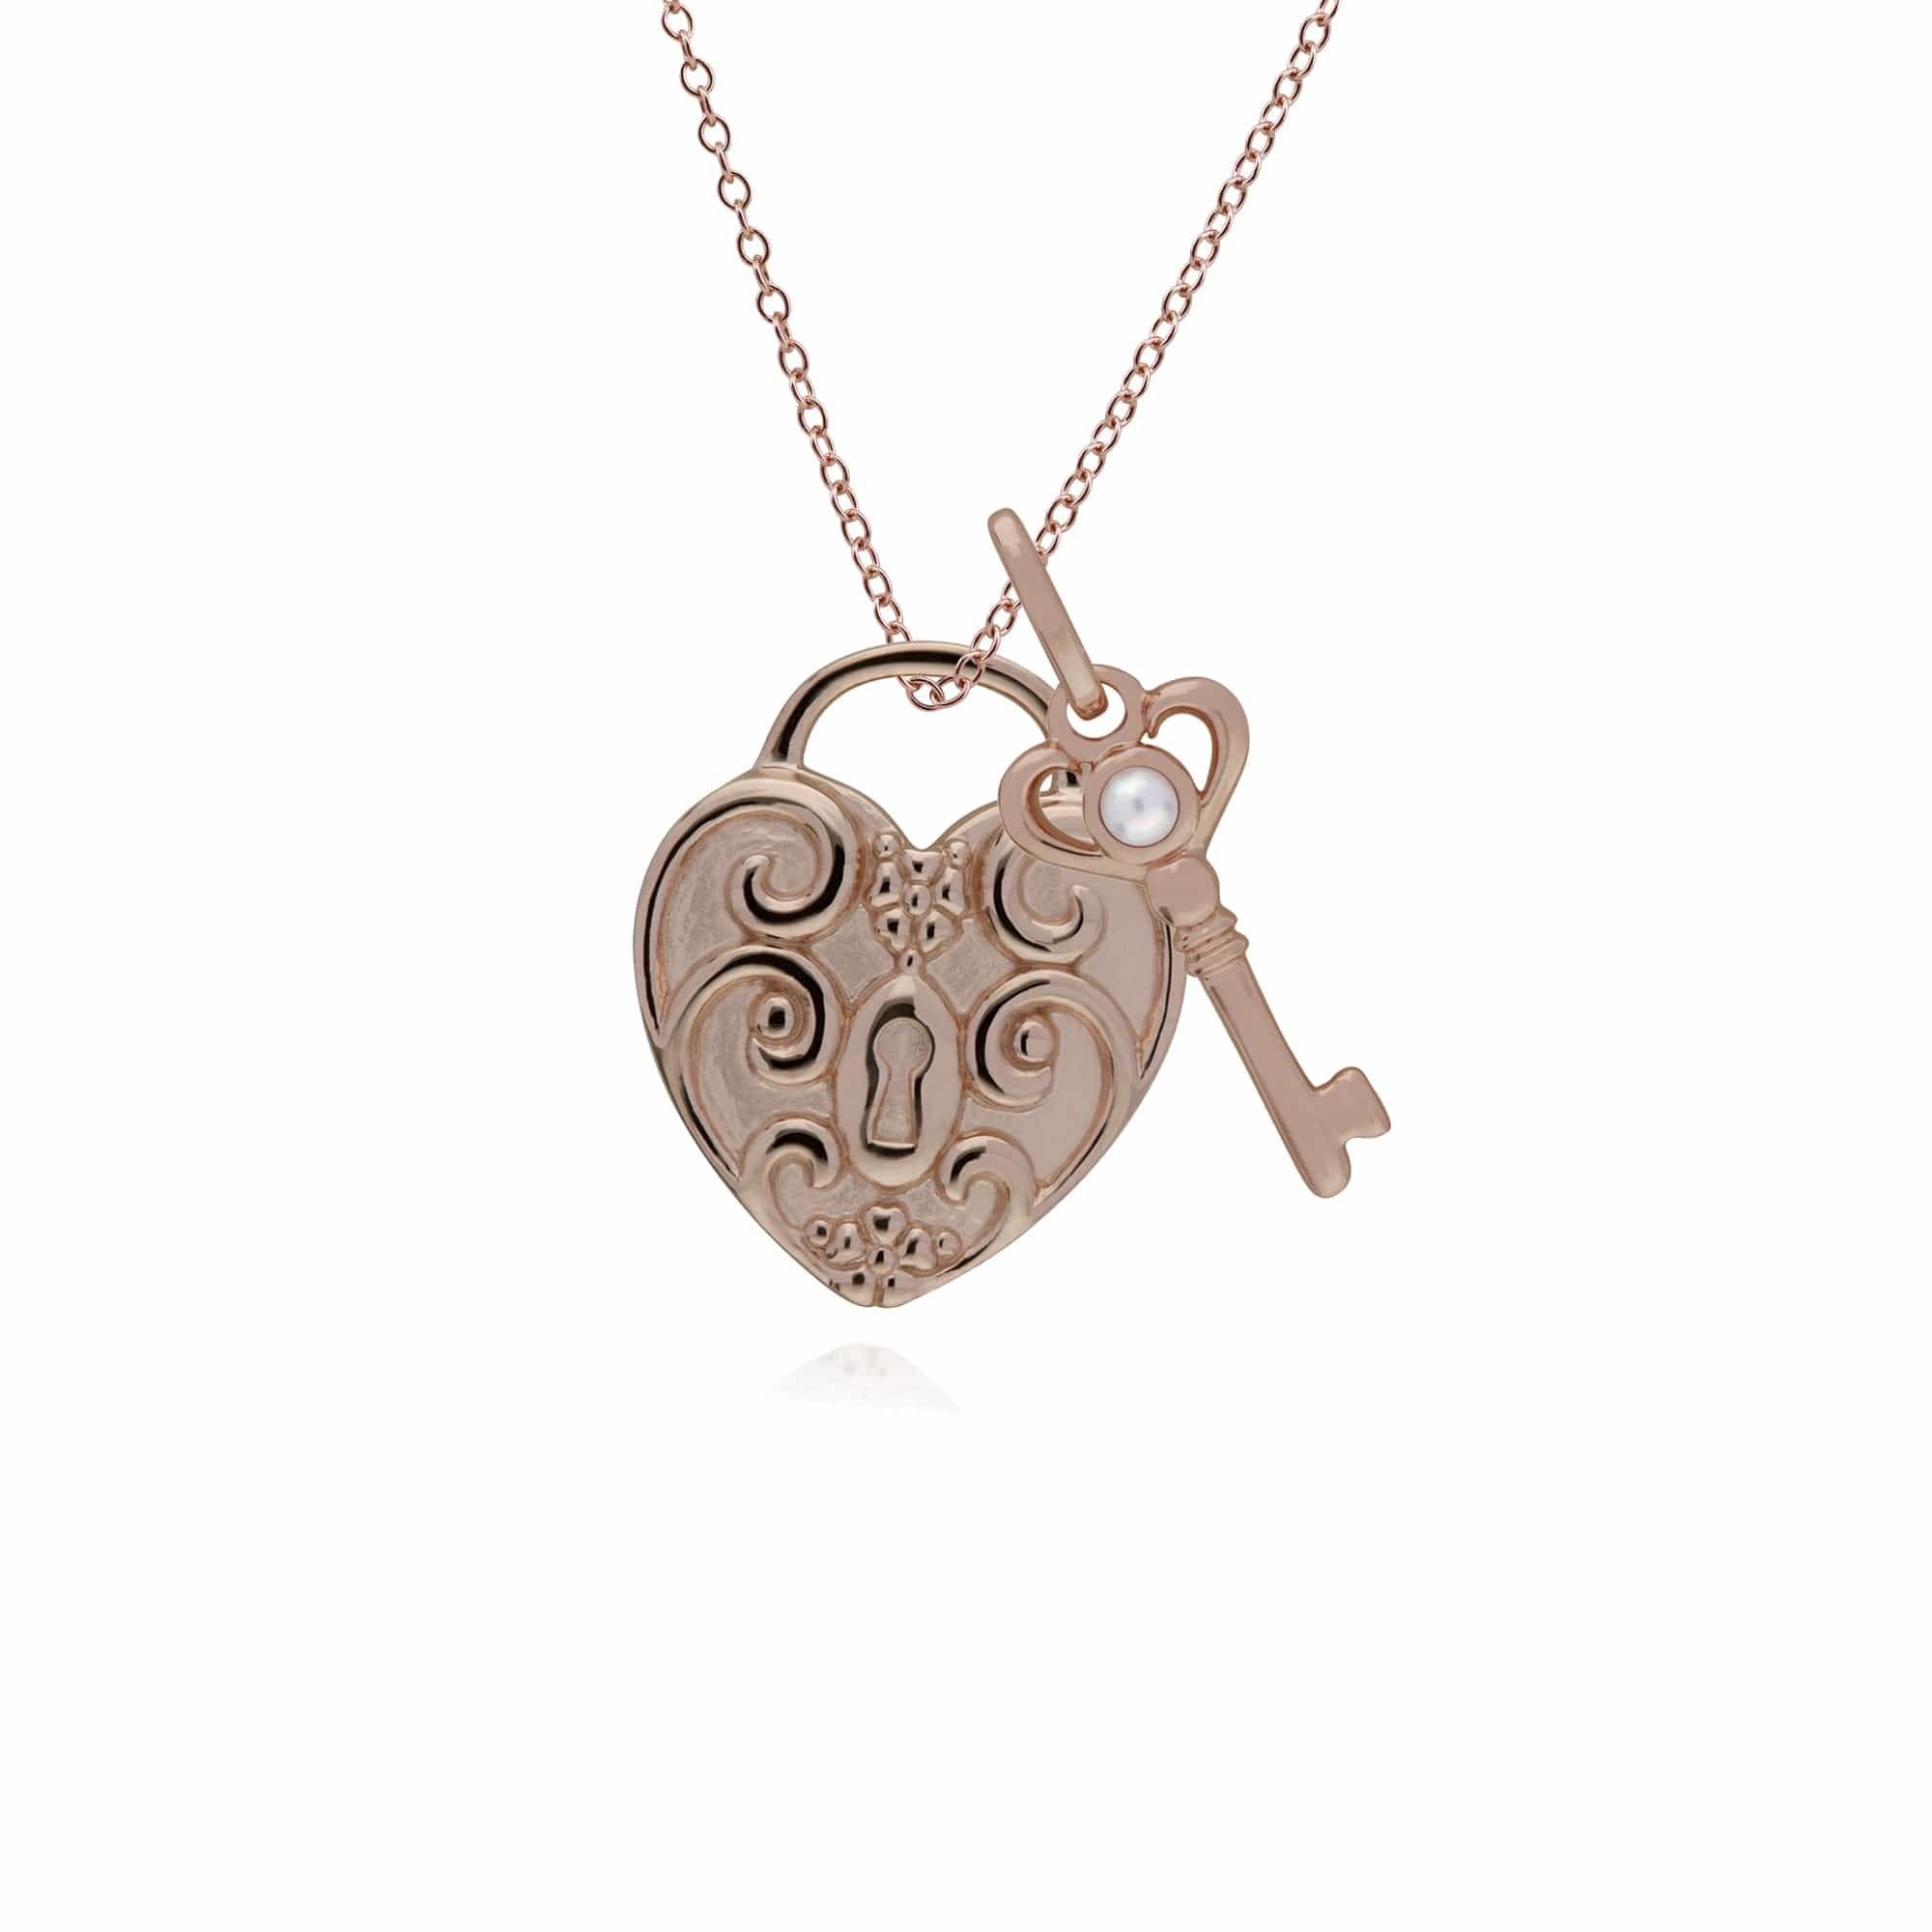 270P027101925-270P026501925 Classic Swirl Heart Lock Pendant & Pearl Key Charm in Rose Gold Plated 925 Sterling Silver 1